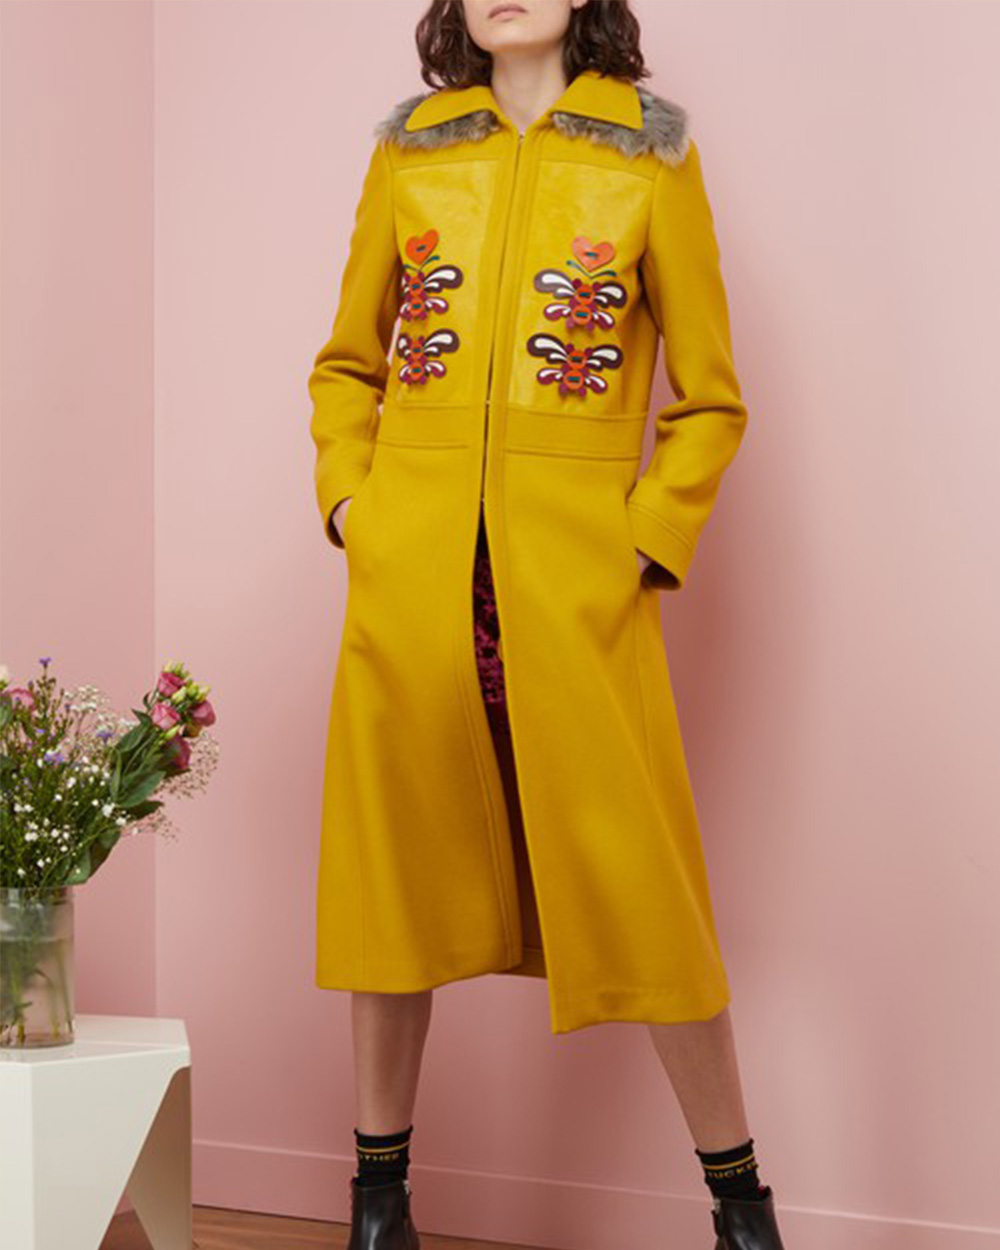 Anya Hindmarch leather applique coat $1500 (was $5,004) from 24Sevres